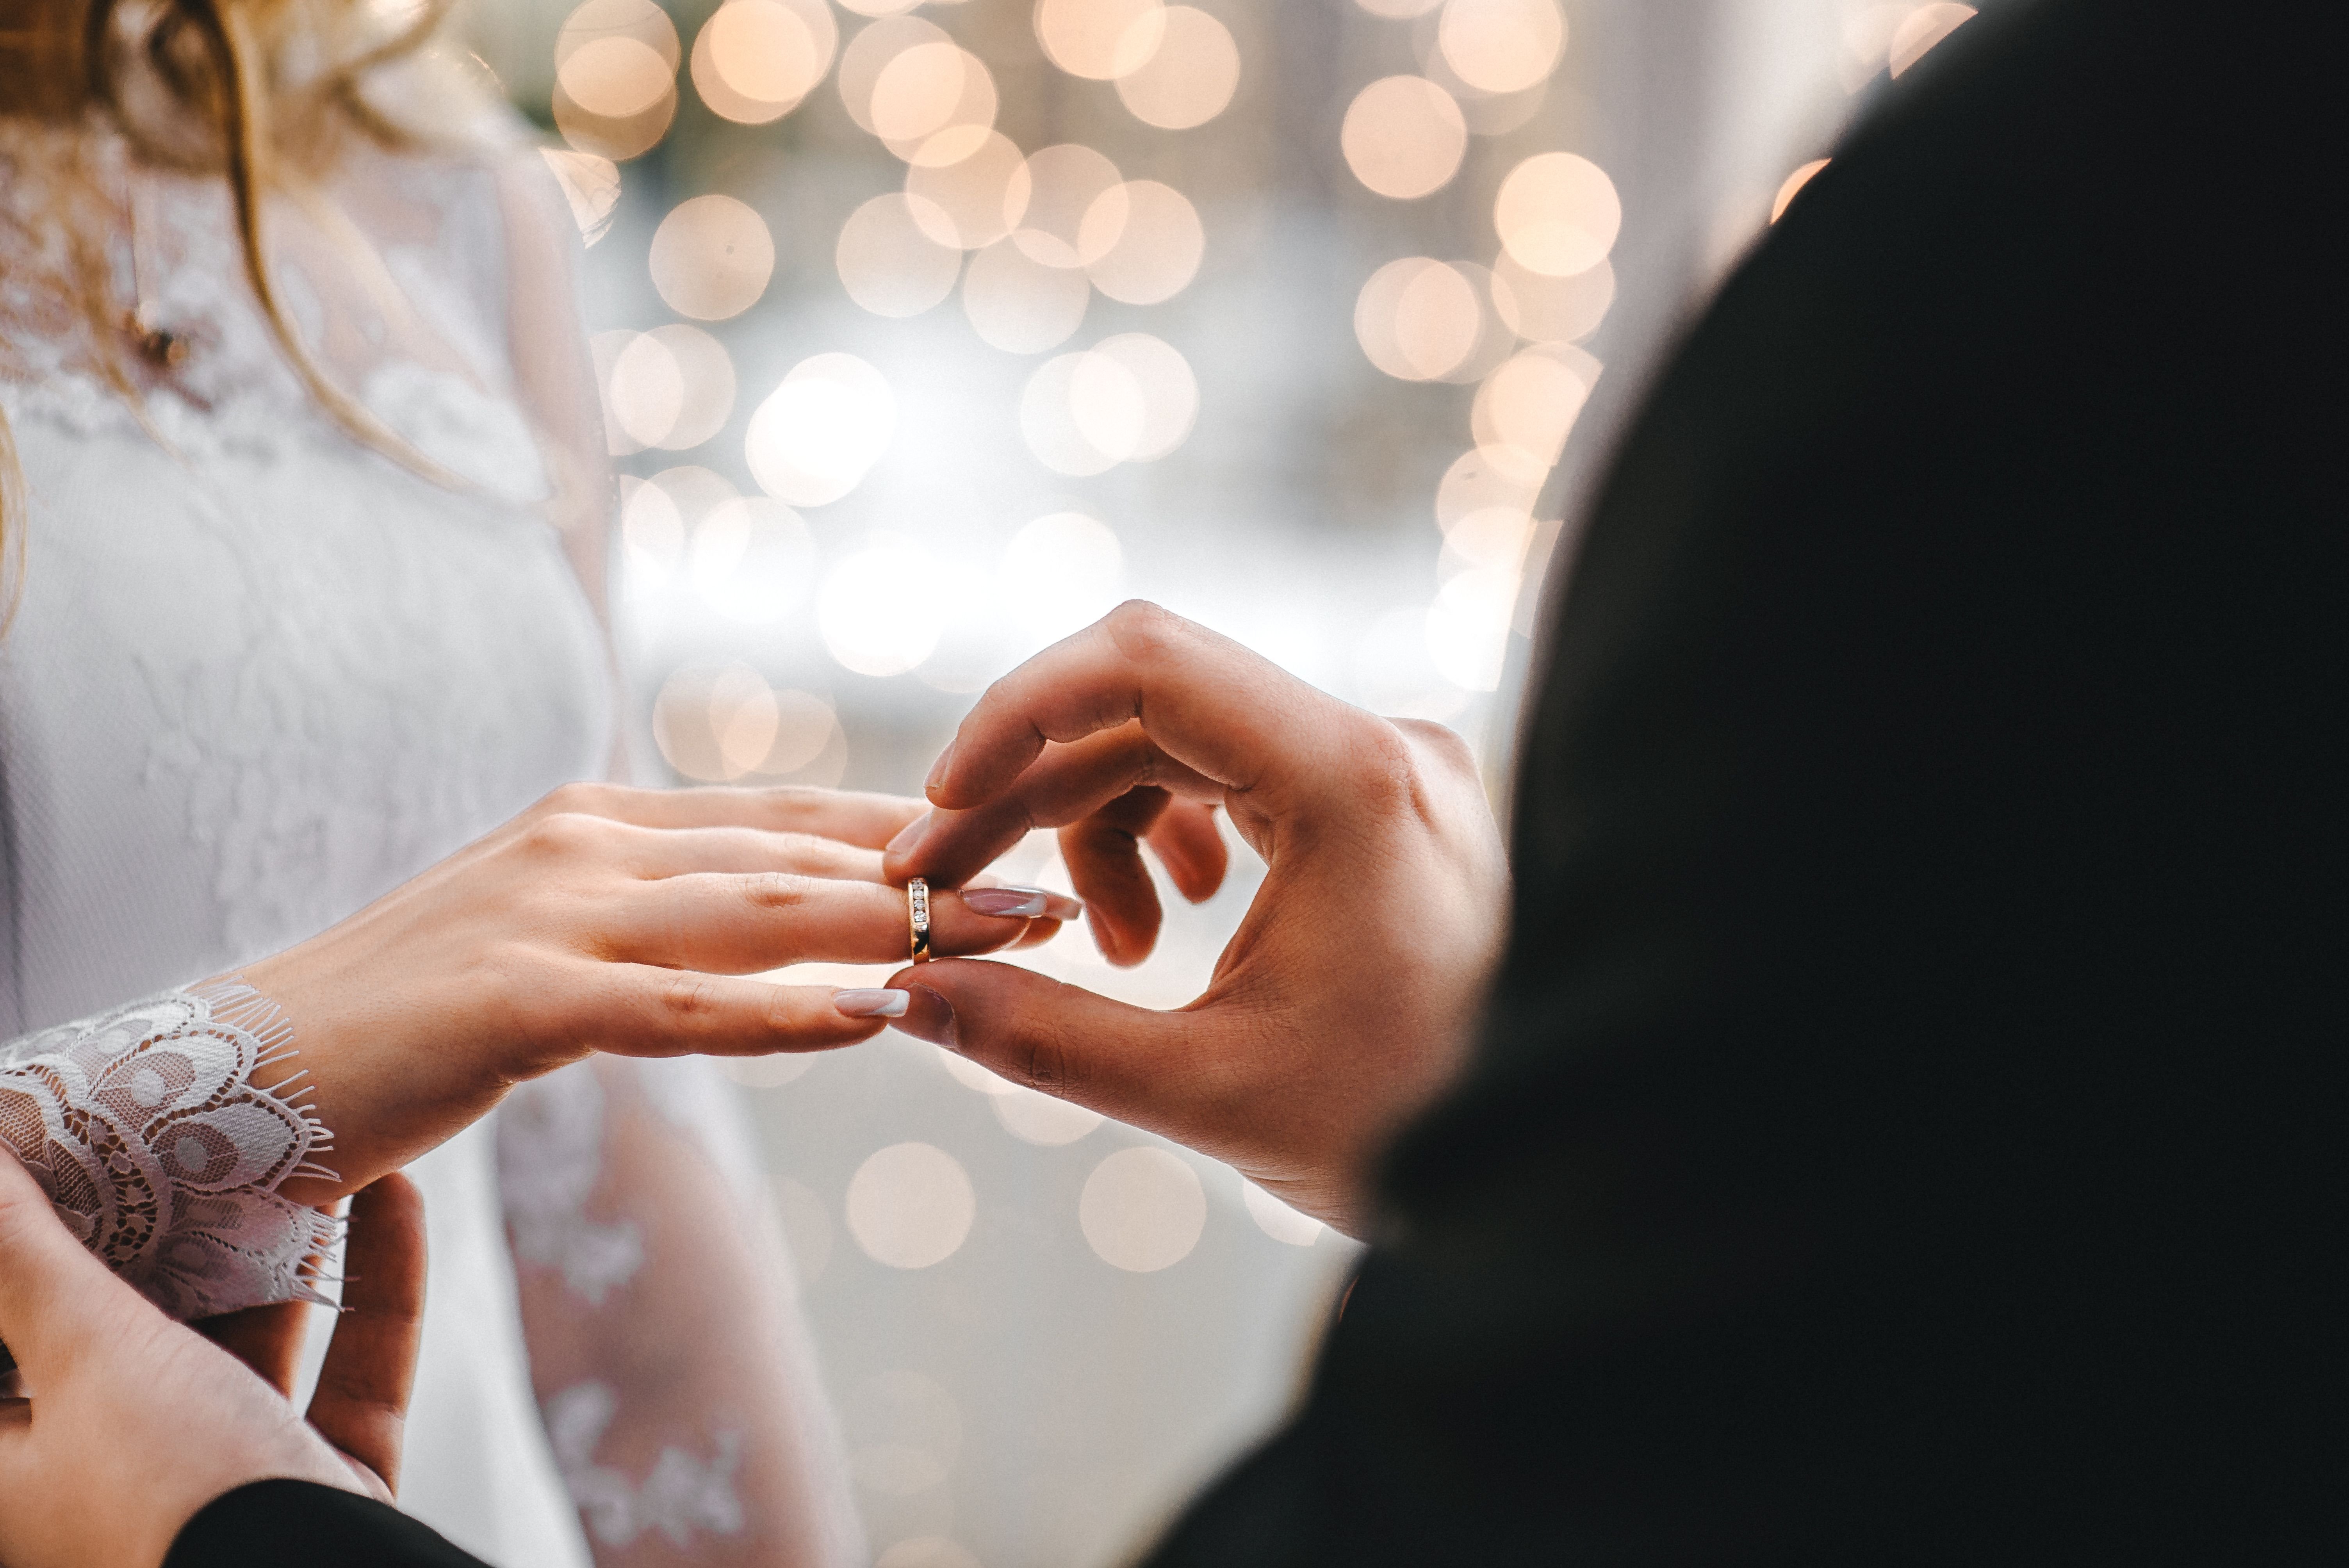 A man putting a wedding ring on a woman’s finger.┃Source: Shutterstock